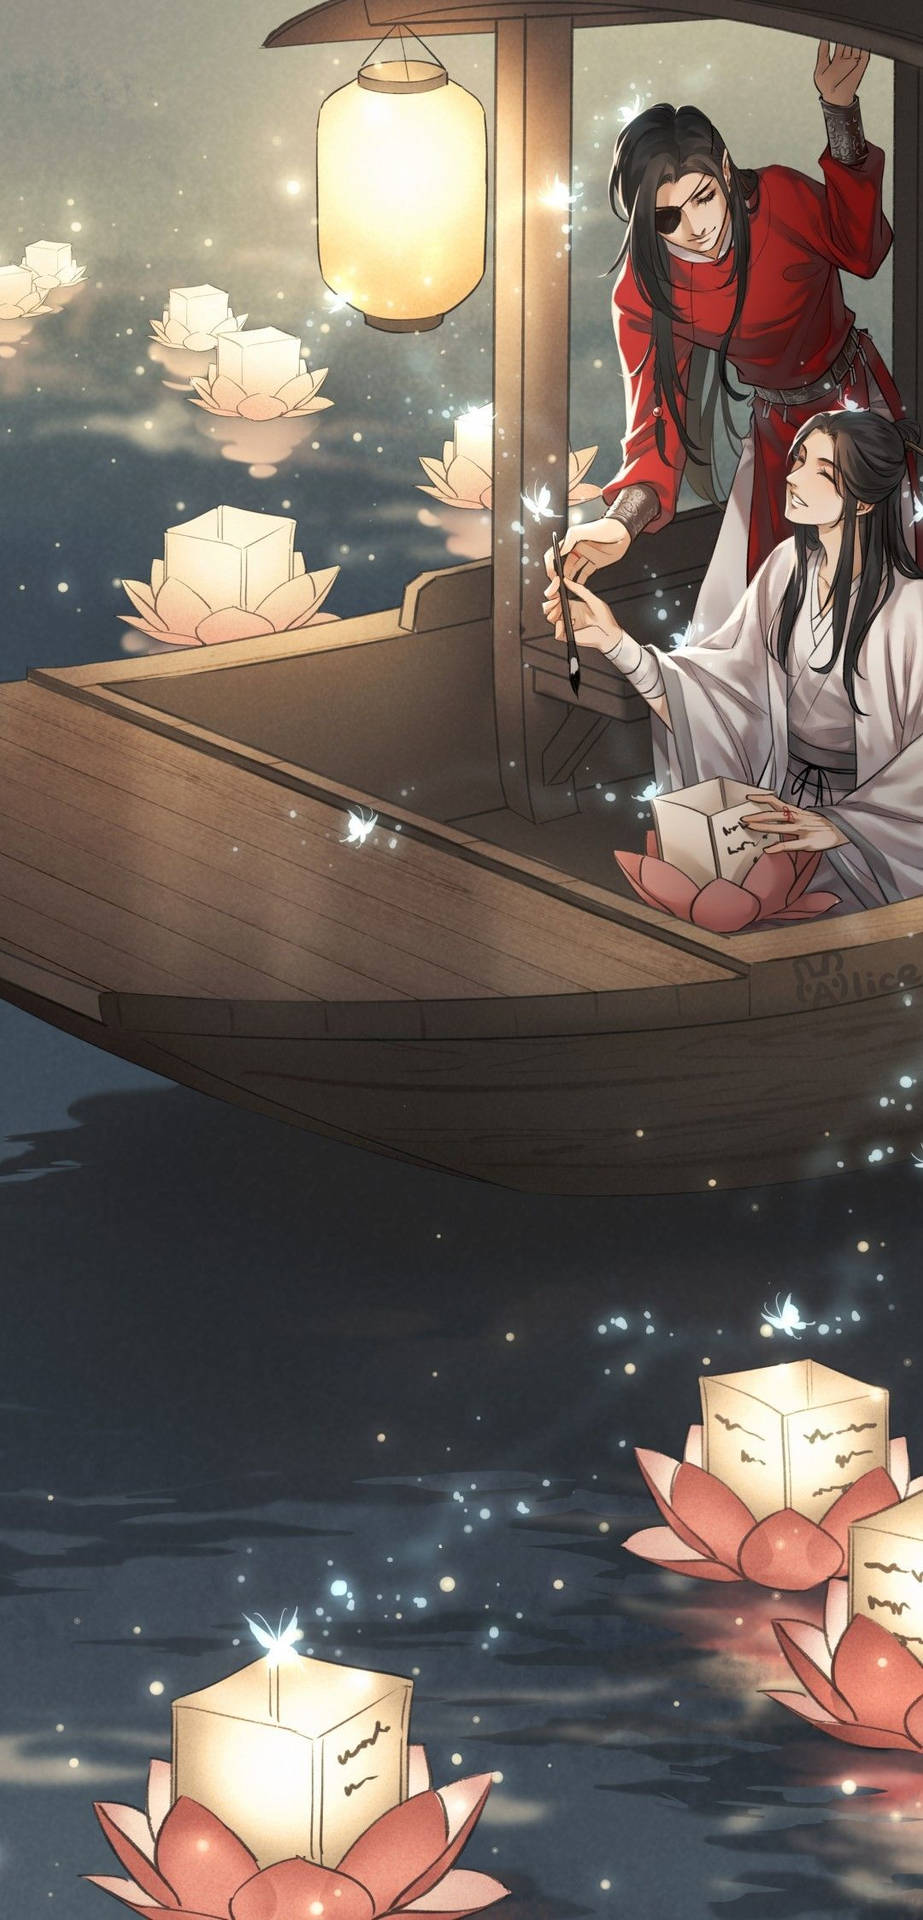 Hua Cheng And Xie On Boat Background